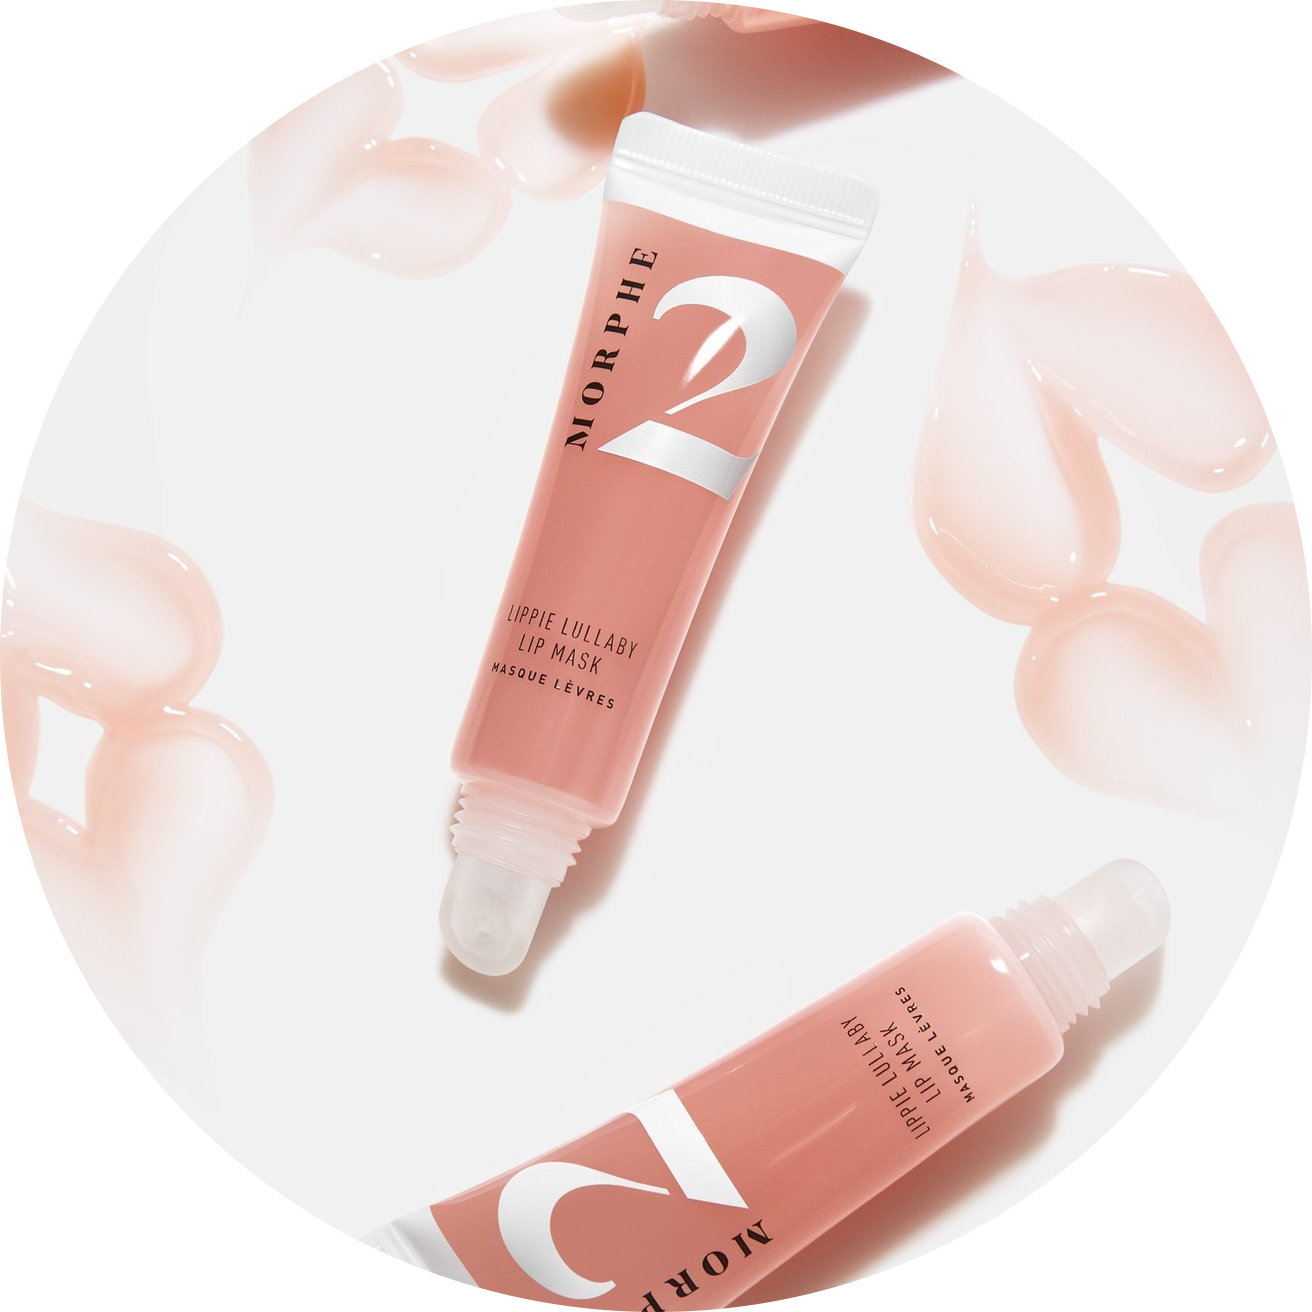 LIPPIE LULLABY LIP MASK NudeFace Chile